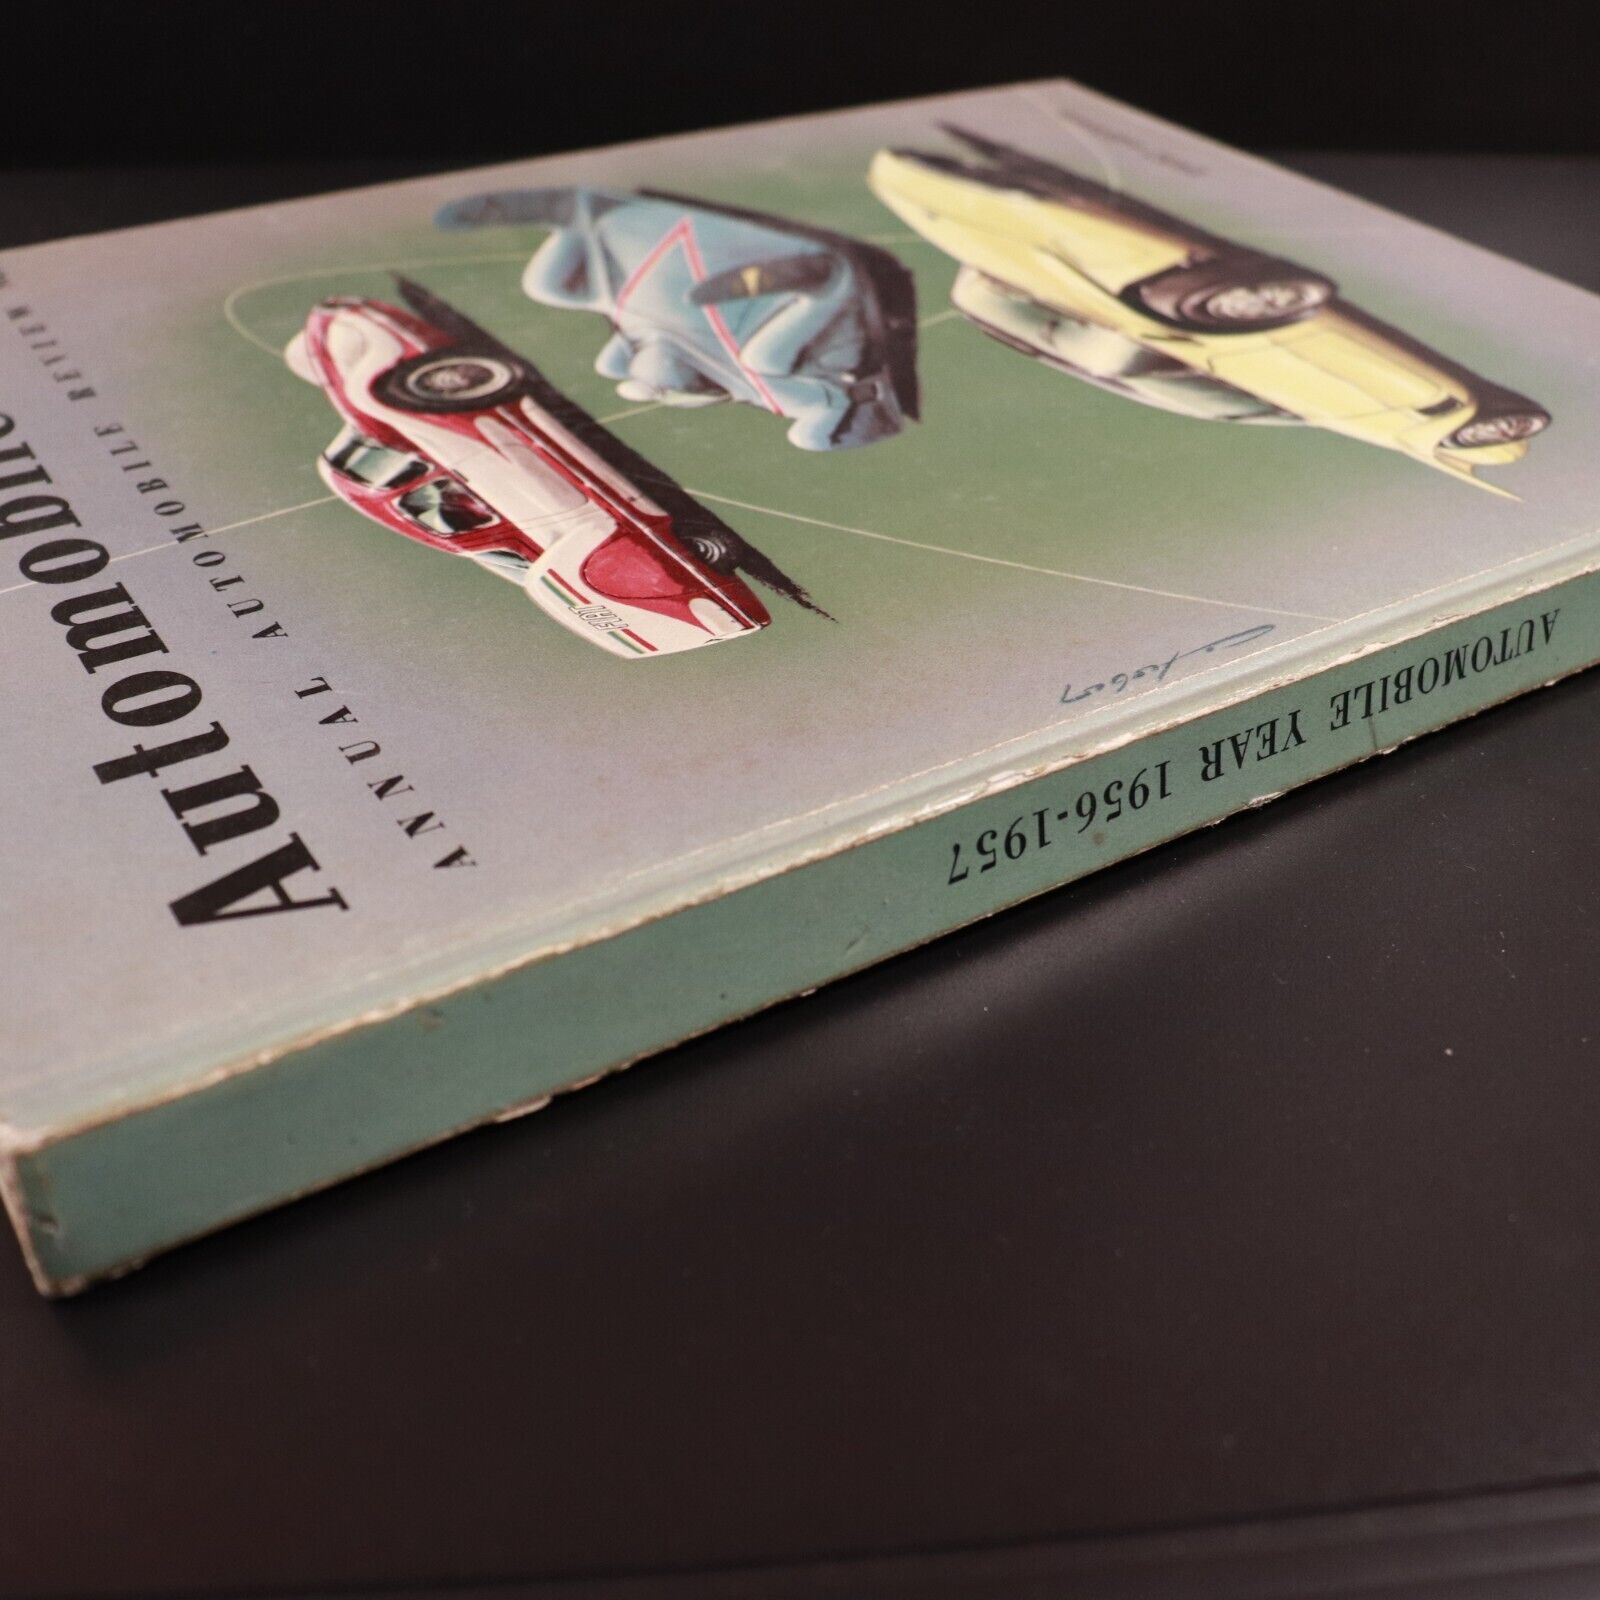 1957 Automobile Year For 1957 A. Guichard Vintage Illustrated Automotive Book - 0